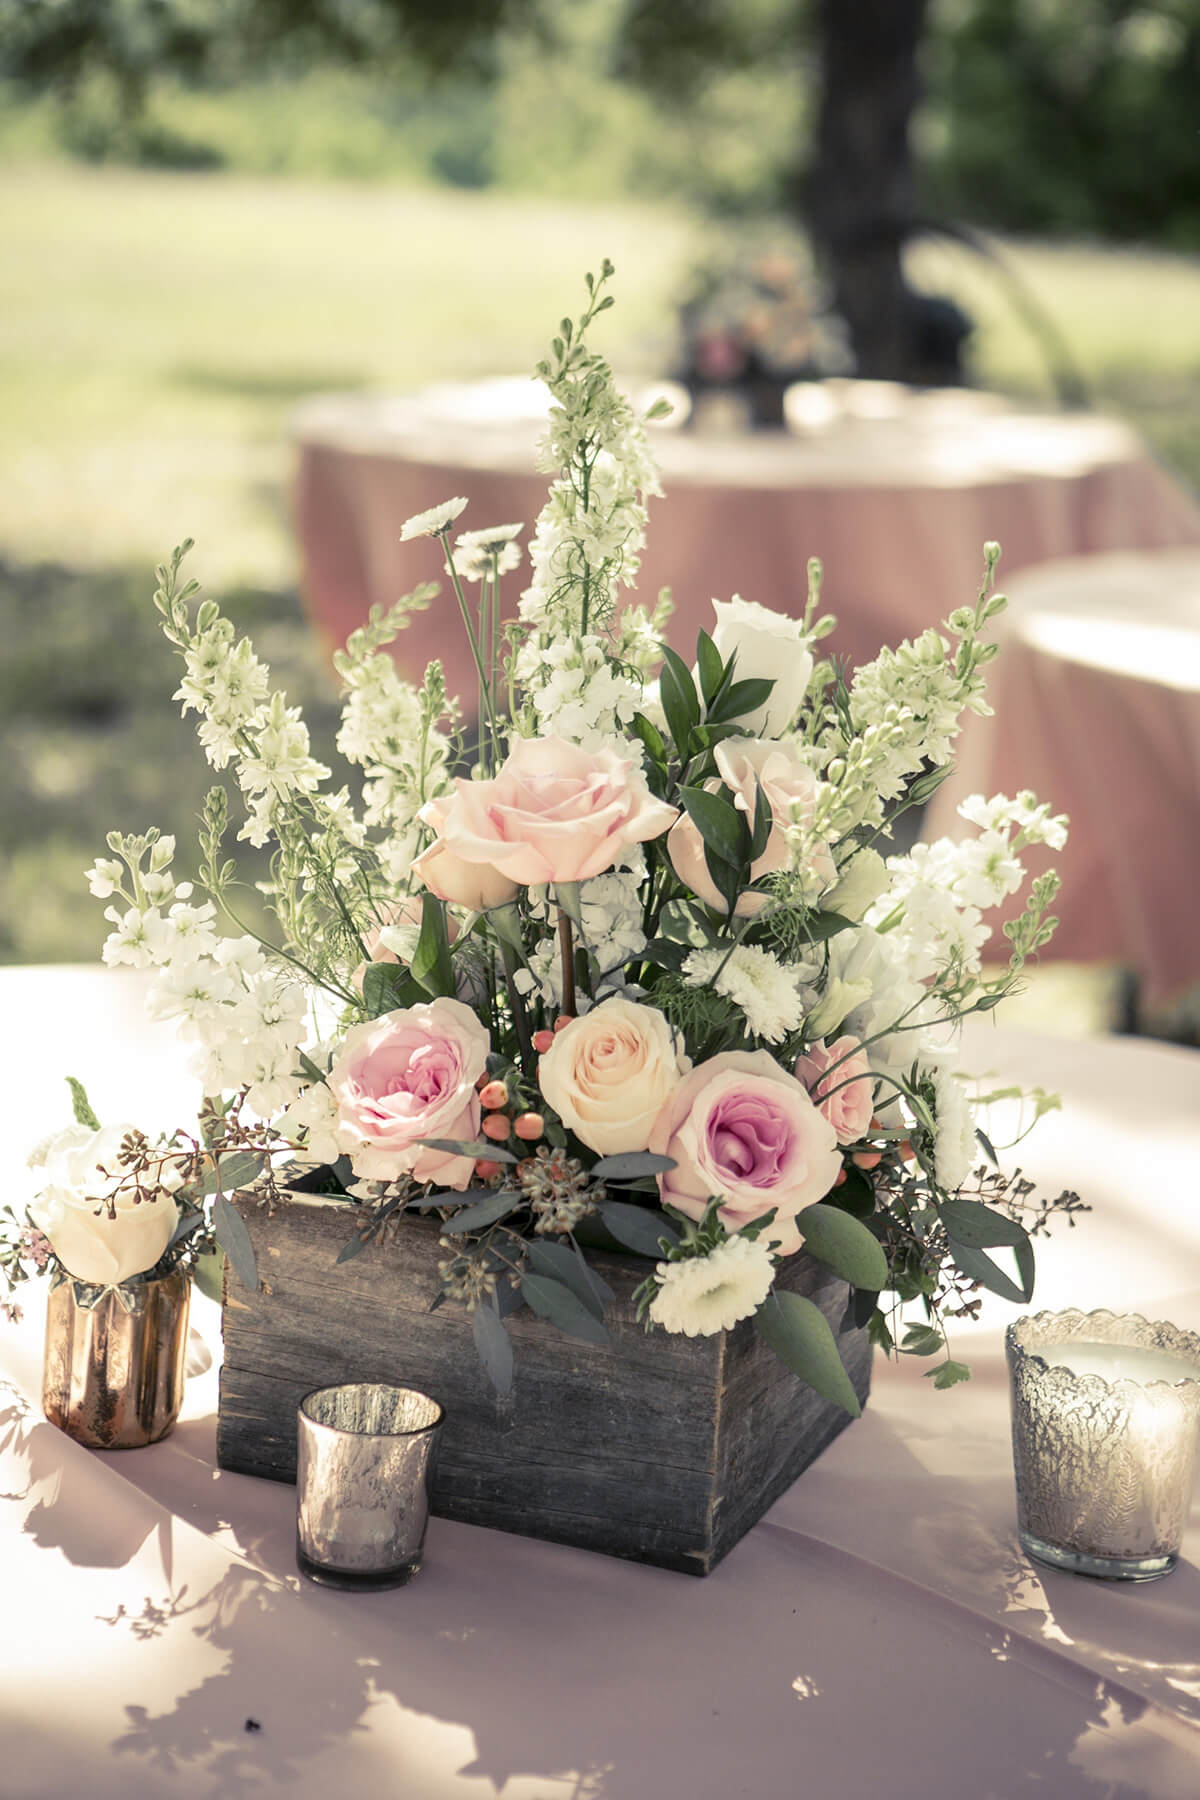 25 Best Rustic Wooden Box Centerpiece Ideas and Designs